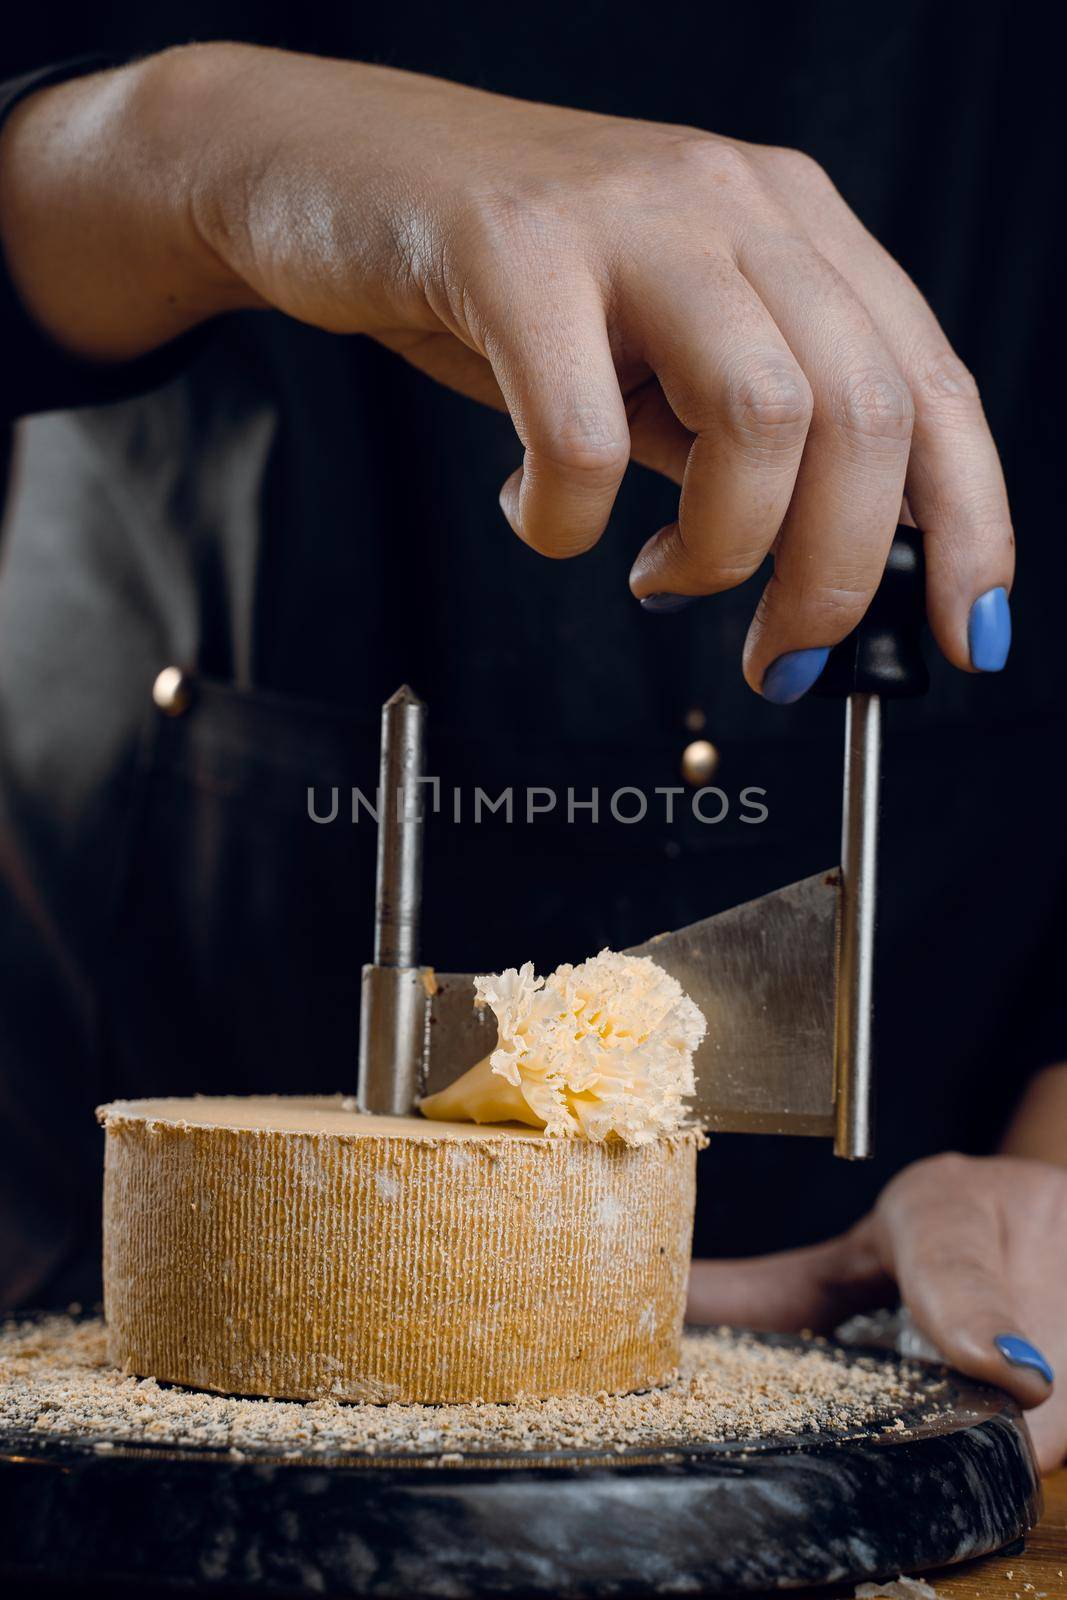 Shaving tete de moine cheese using girolle knife. Monks head. Variety of Swiss semi-hard cheese made from cows milk.